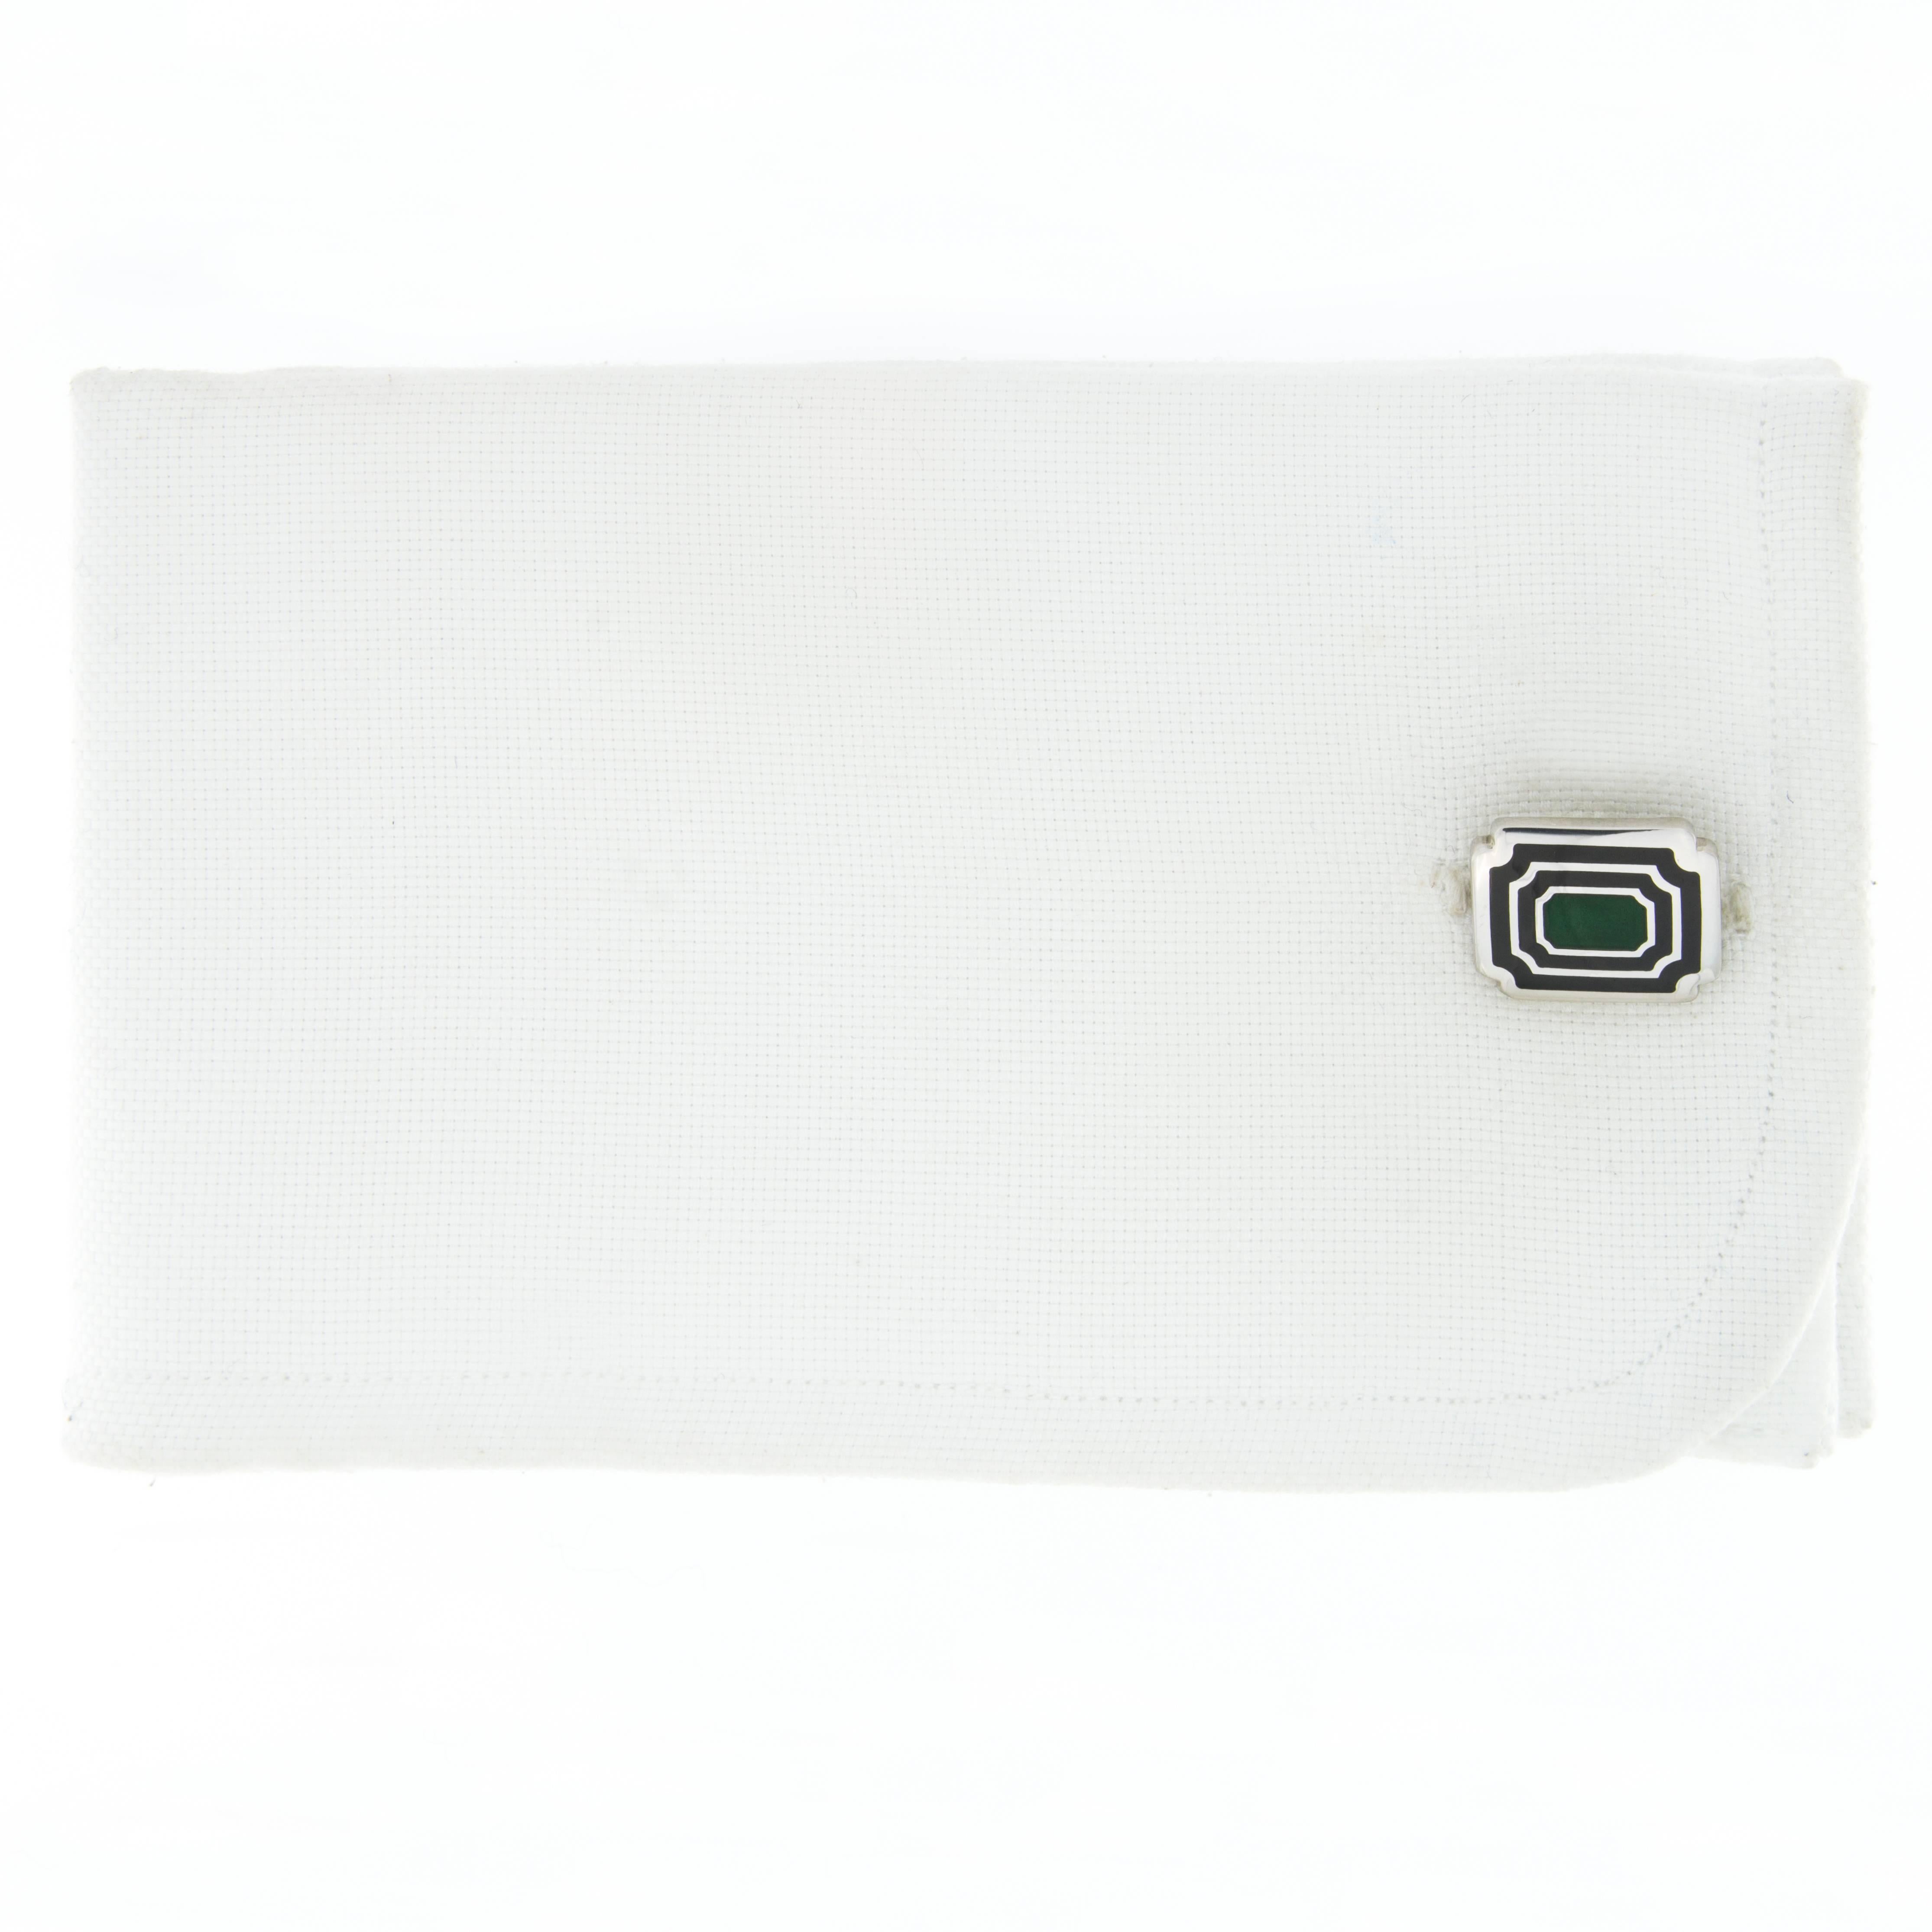 Jona design collection, hand crafted in Italy, rhodium plated Sterling Silver rectangular cufflinks with blue and green enamel. Toggle back.
Dimensions: 0.58 in. W x 0.52 in. L - 15 mm. W x 13 mm. L
All Jona jewelry is new and has never been